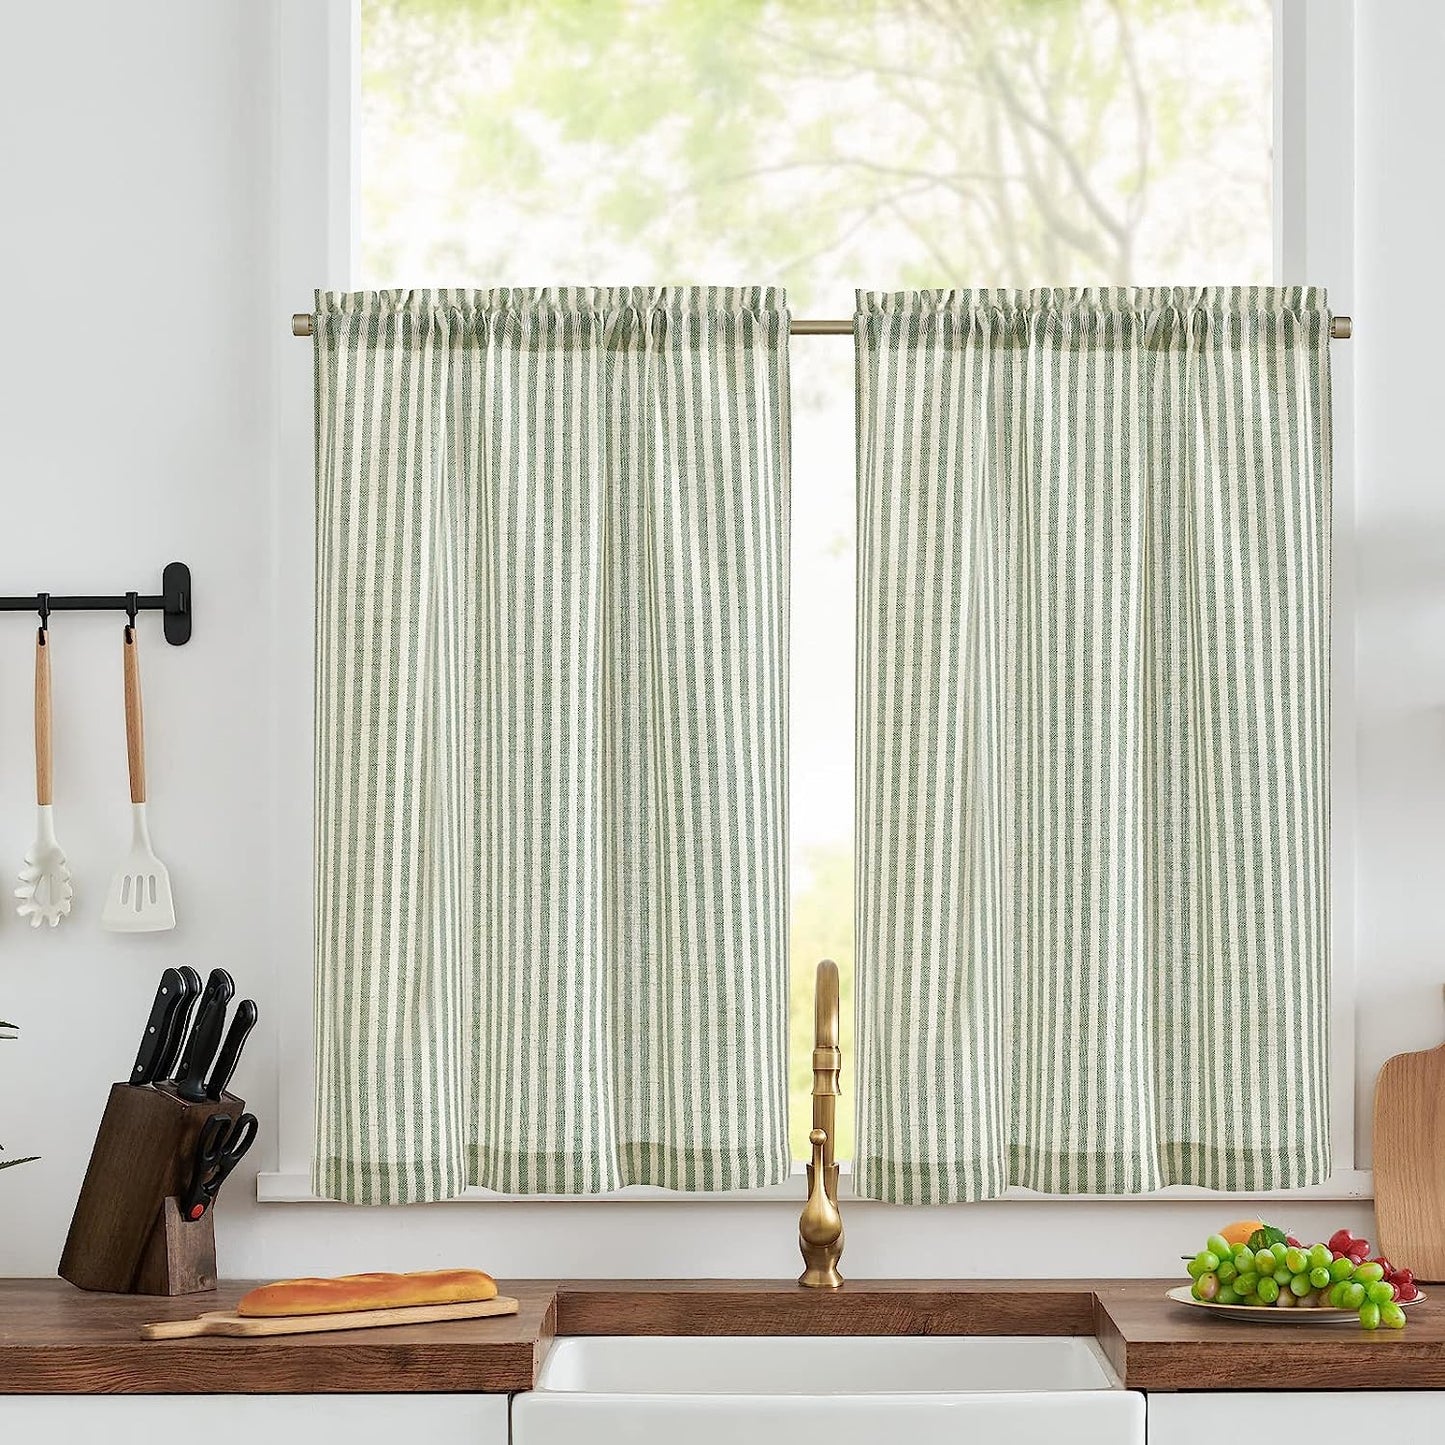 Jinchan Kitchen Curtains Striped Tier Curtains Ticking Stripe Linen Curtains Pinstripe Cafe Curtains 24 Inch Length for Living Room Bathroom Farmhouse Curtains Rod Pocket 2 Panels Black on Beige  CKNY HOME FASHION Rod Pocket Striped Sage Green Green W26 X L45 